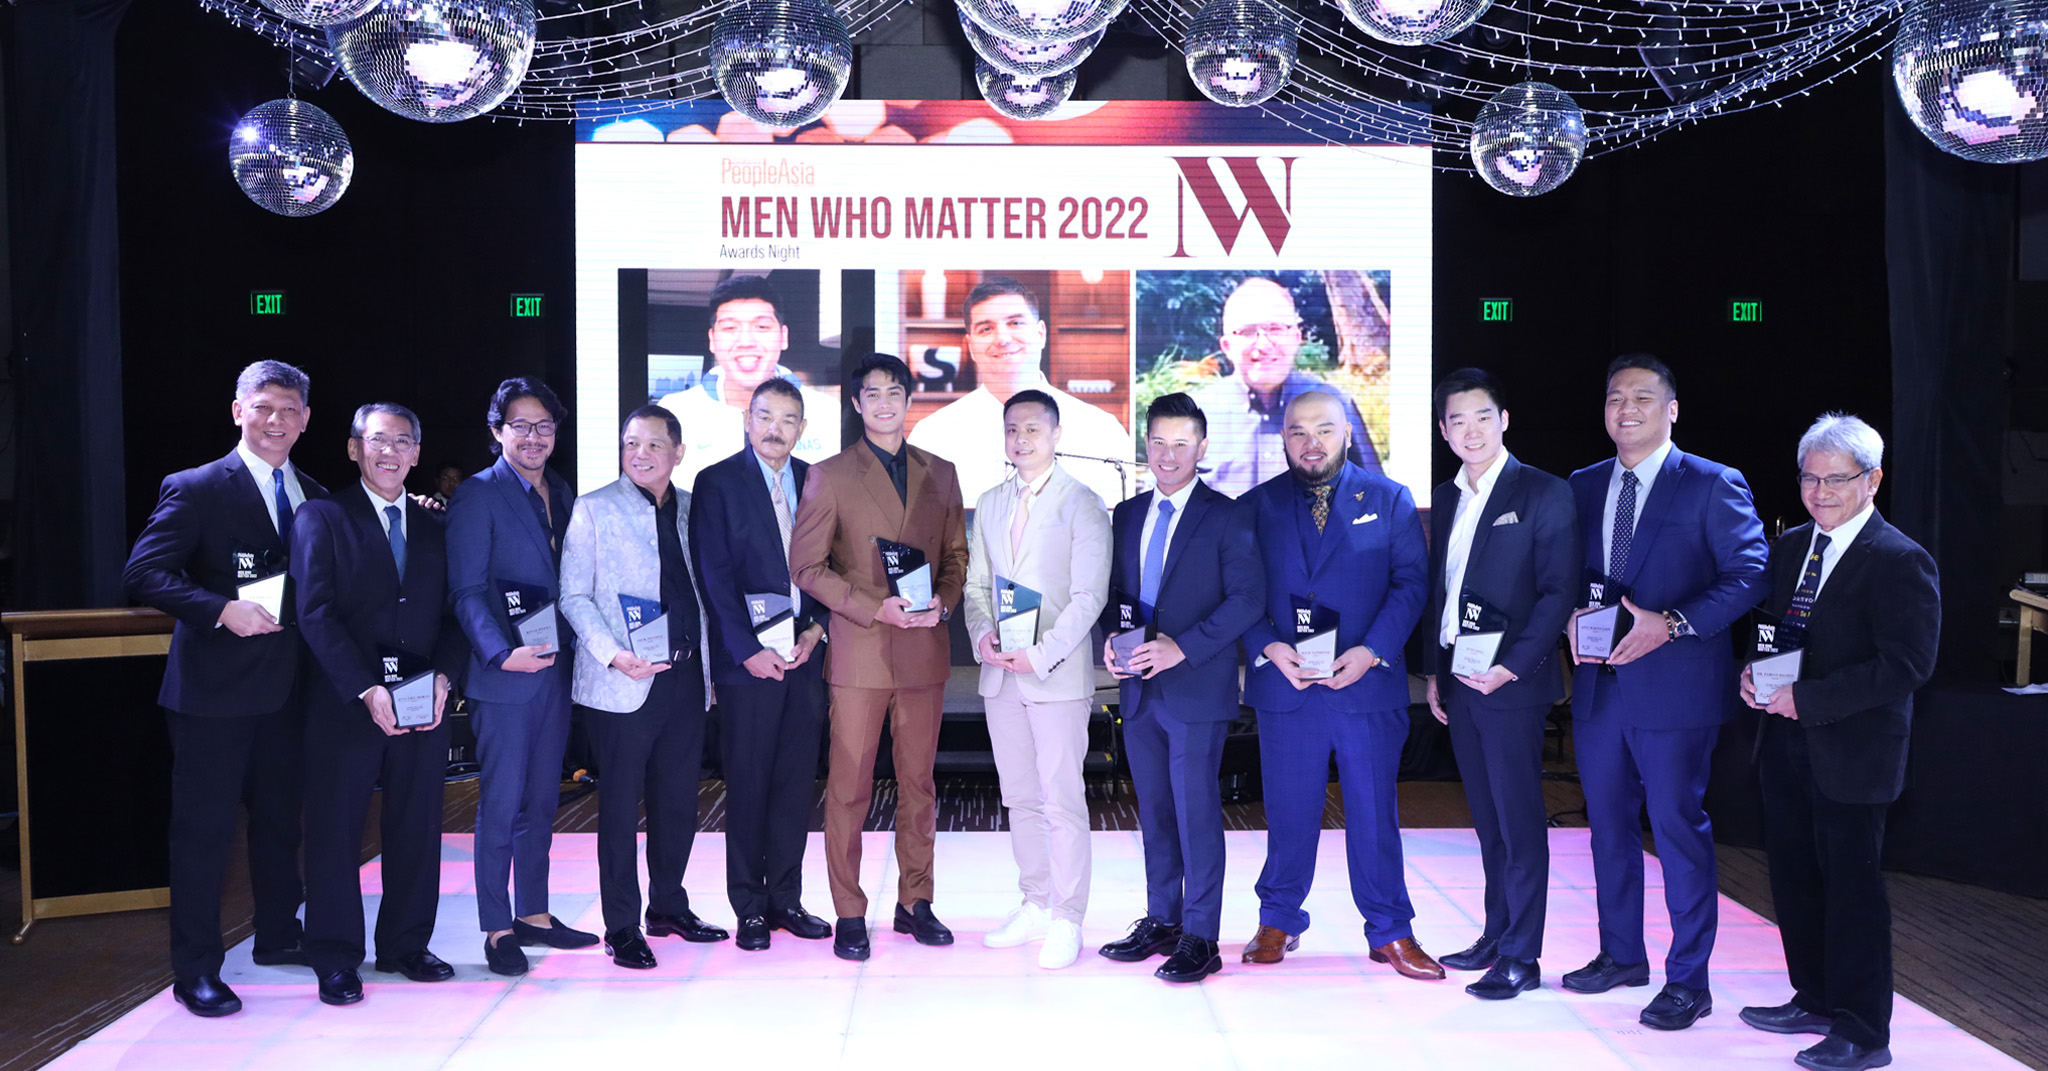 PeopleAsia lauds “Men Who Matter as people!”